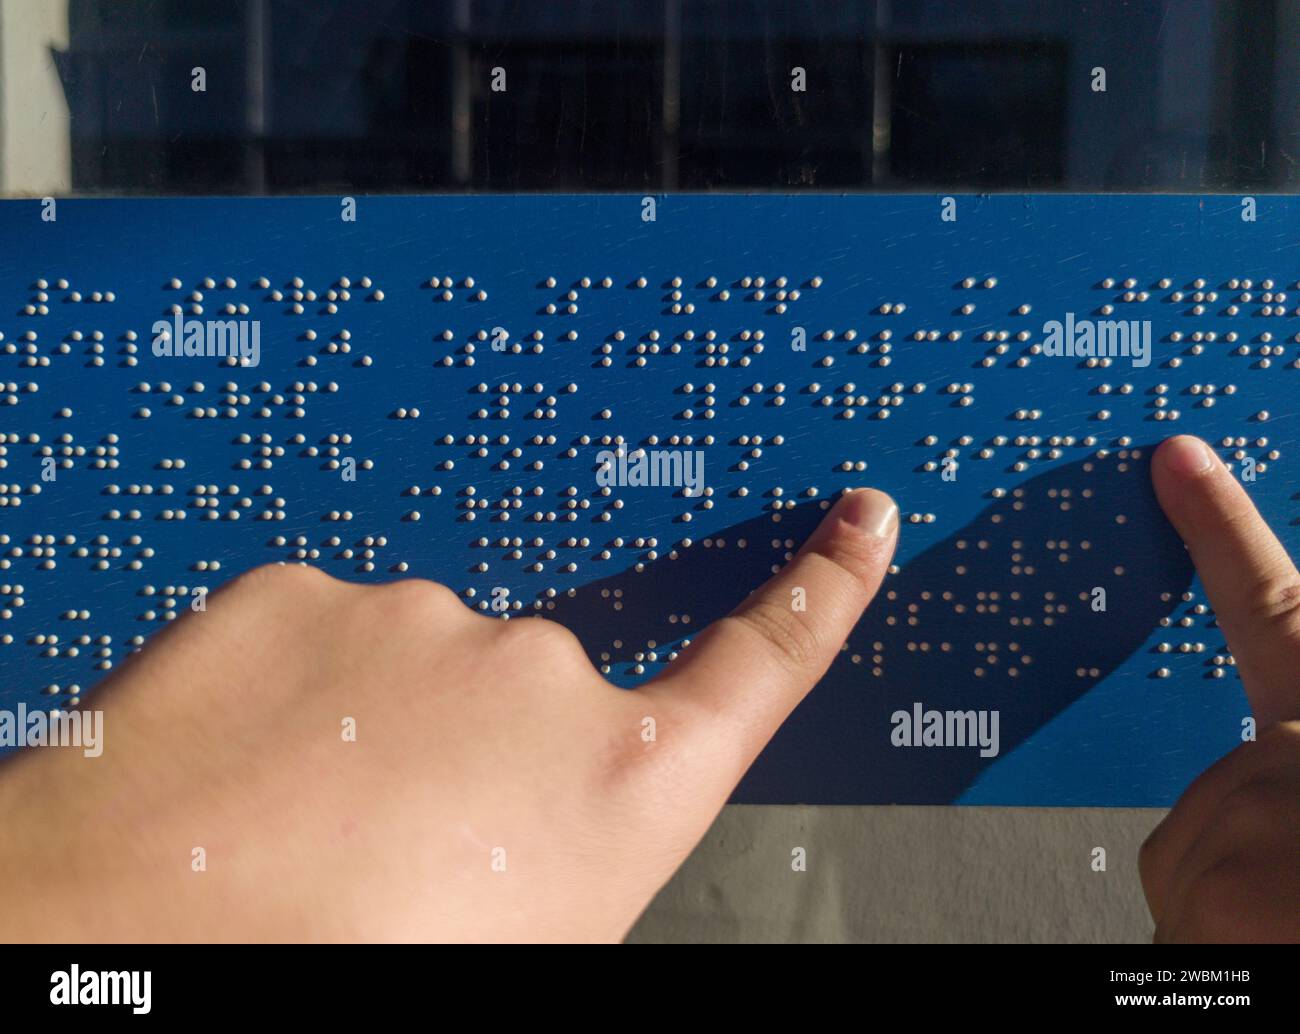 Child hands reading text caption in braille language at bus stop glass. Accesible transports concept Stock Photo